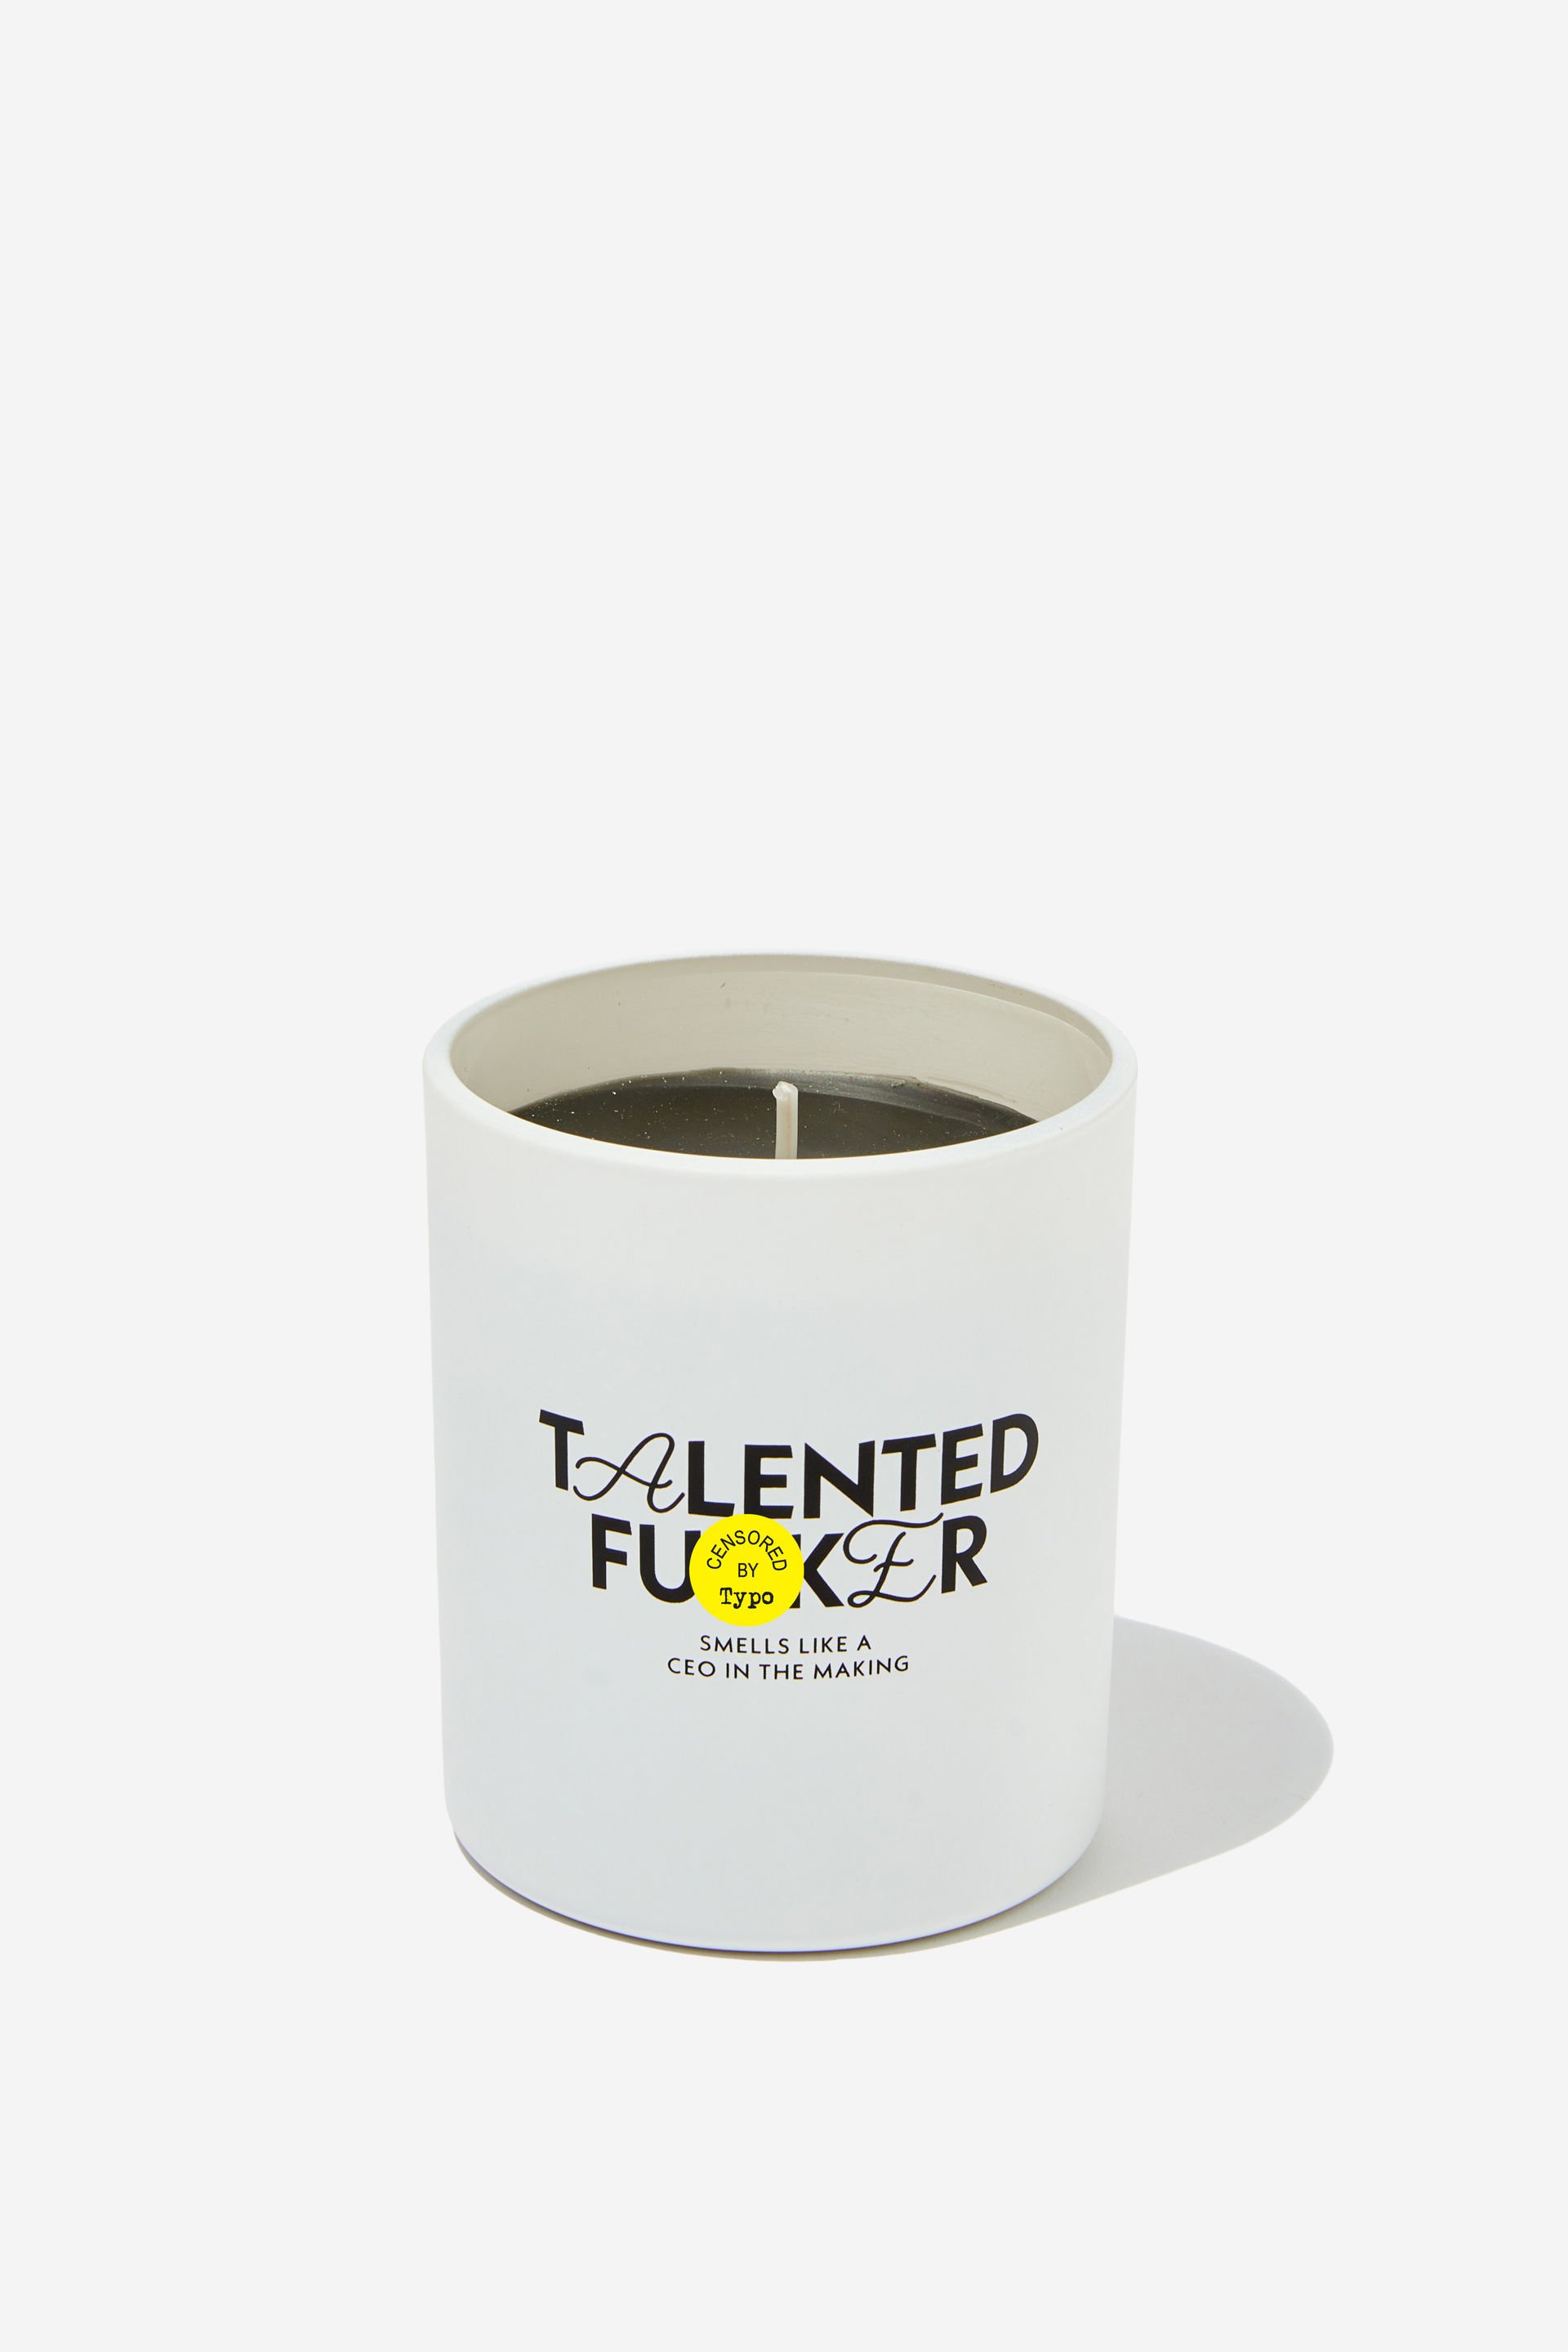 Typo - Tell It Like It Is Candle - Black talented fu**er!!